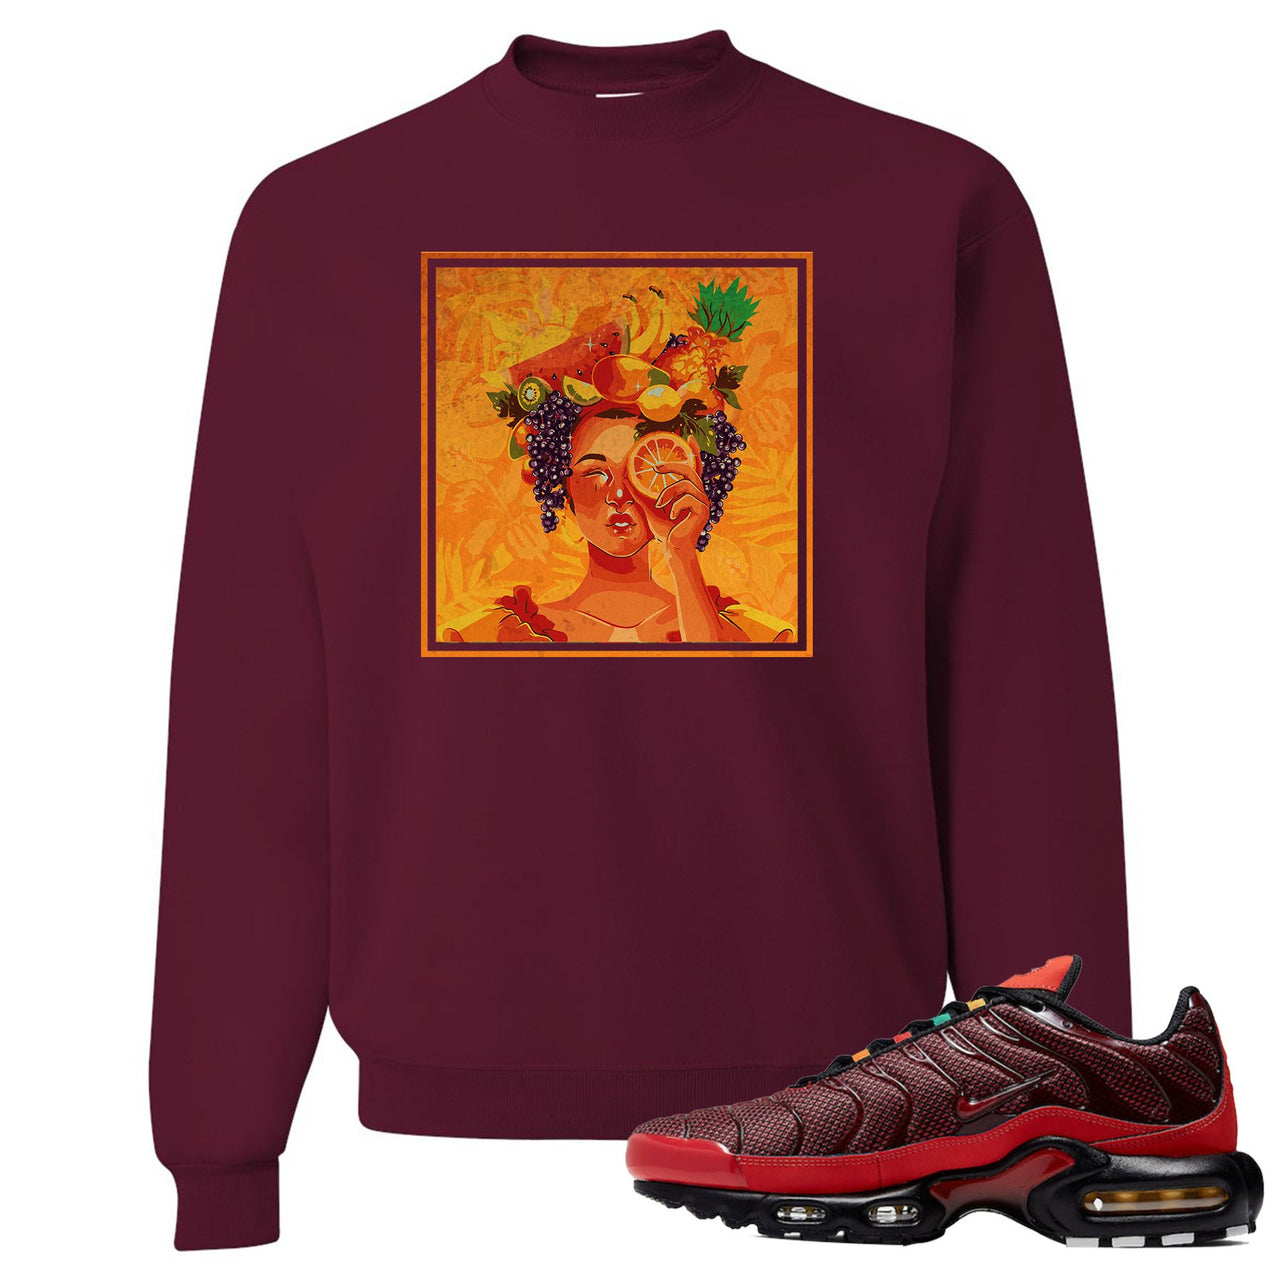 printed on the front of the nike air max plus sneaker matching maroon crewneck sweatshirt is the lady fruit logo